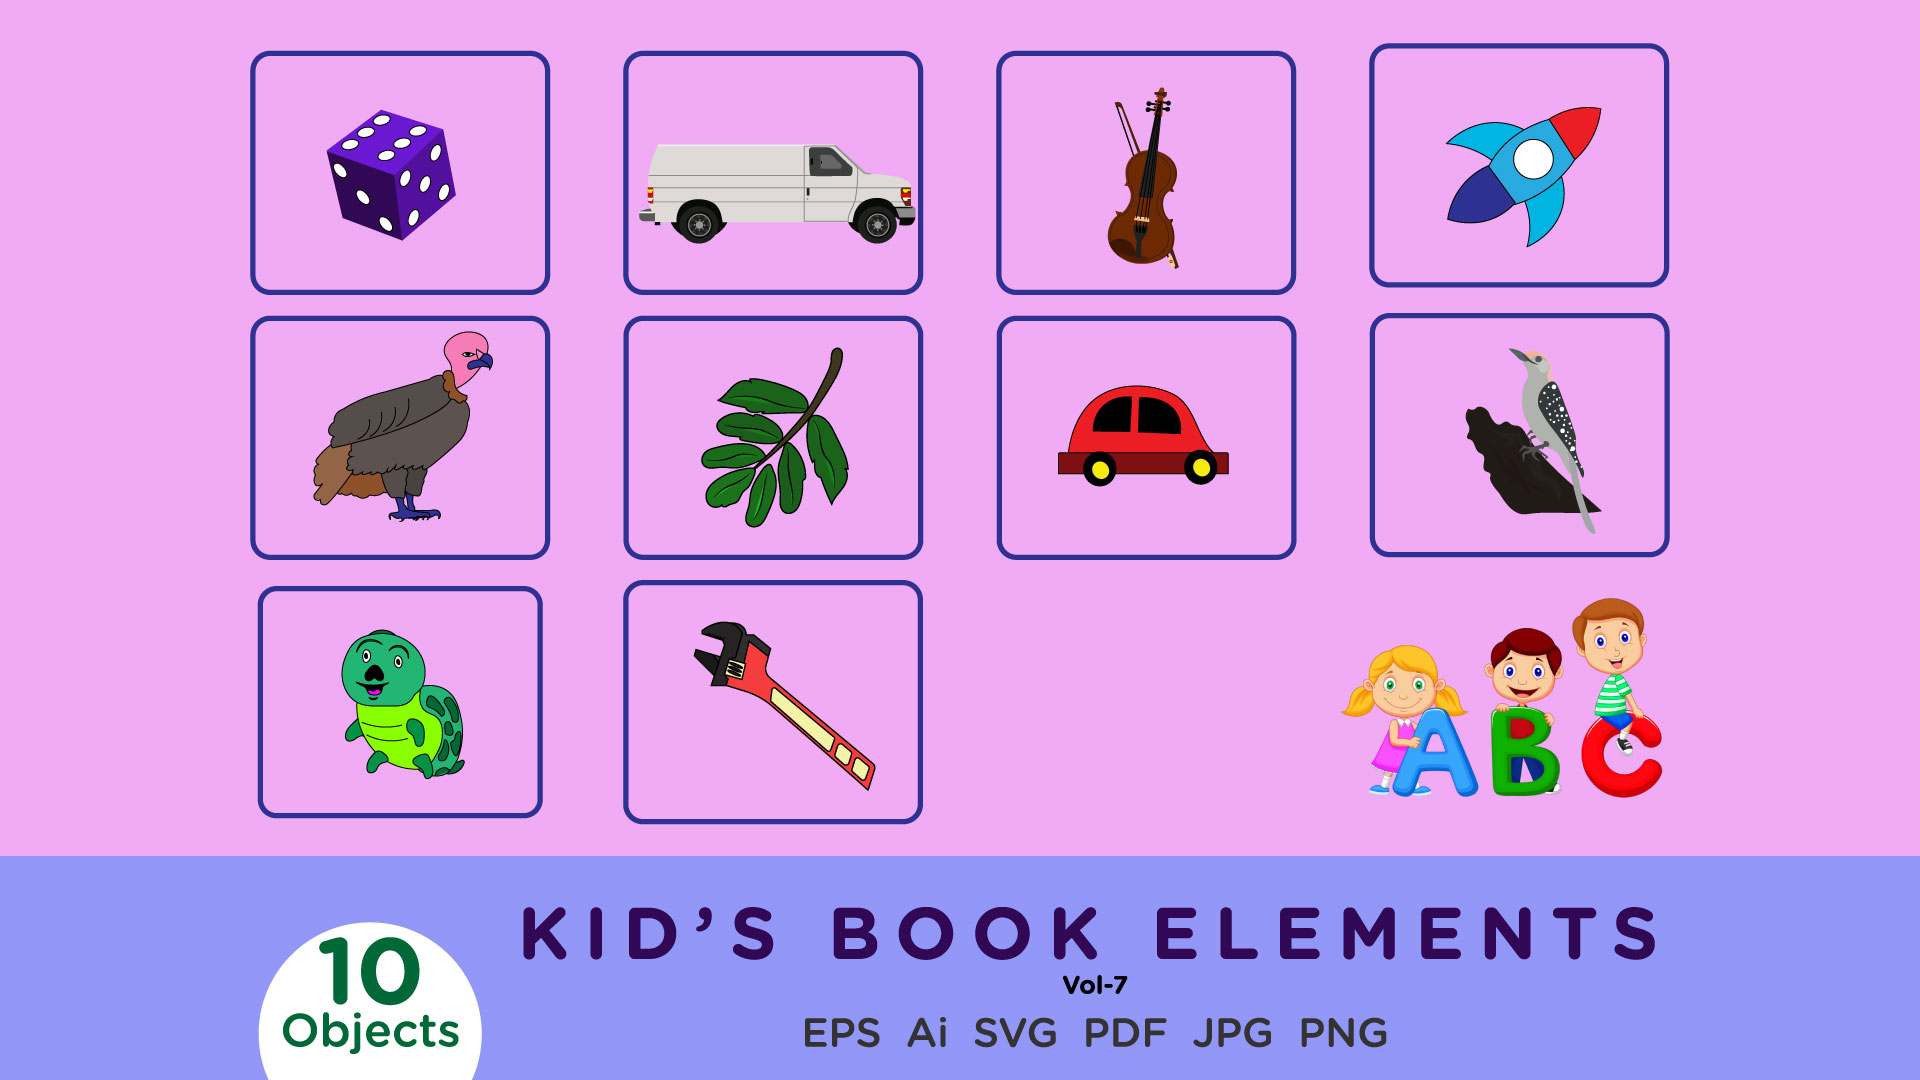 Kids Book Elements Vol-7 cover image.